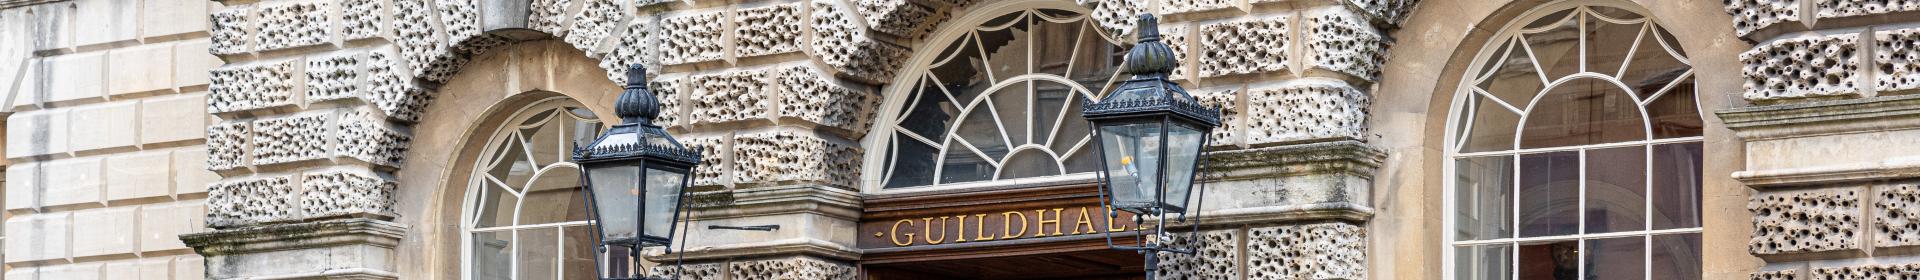 Image: Guildhall exterior